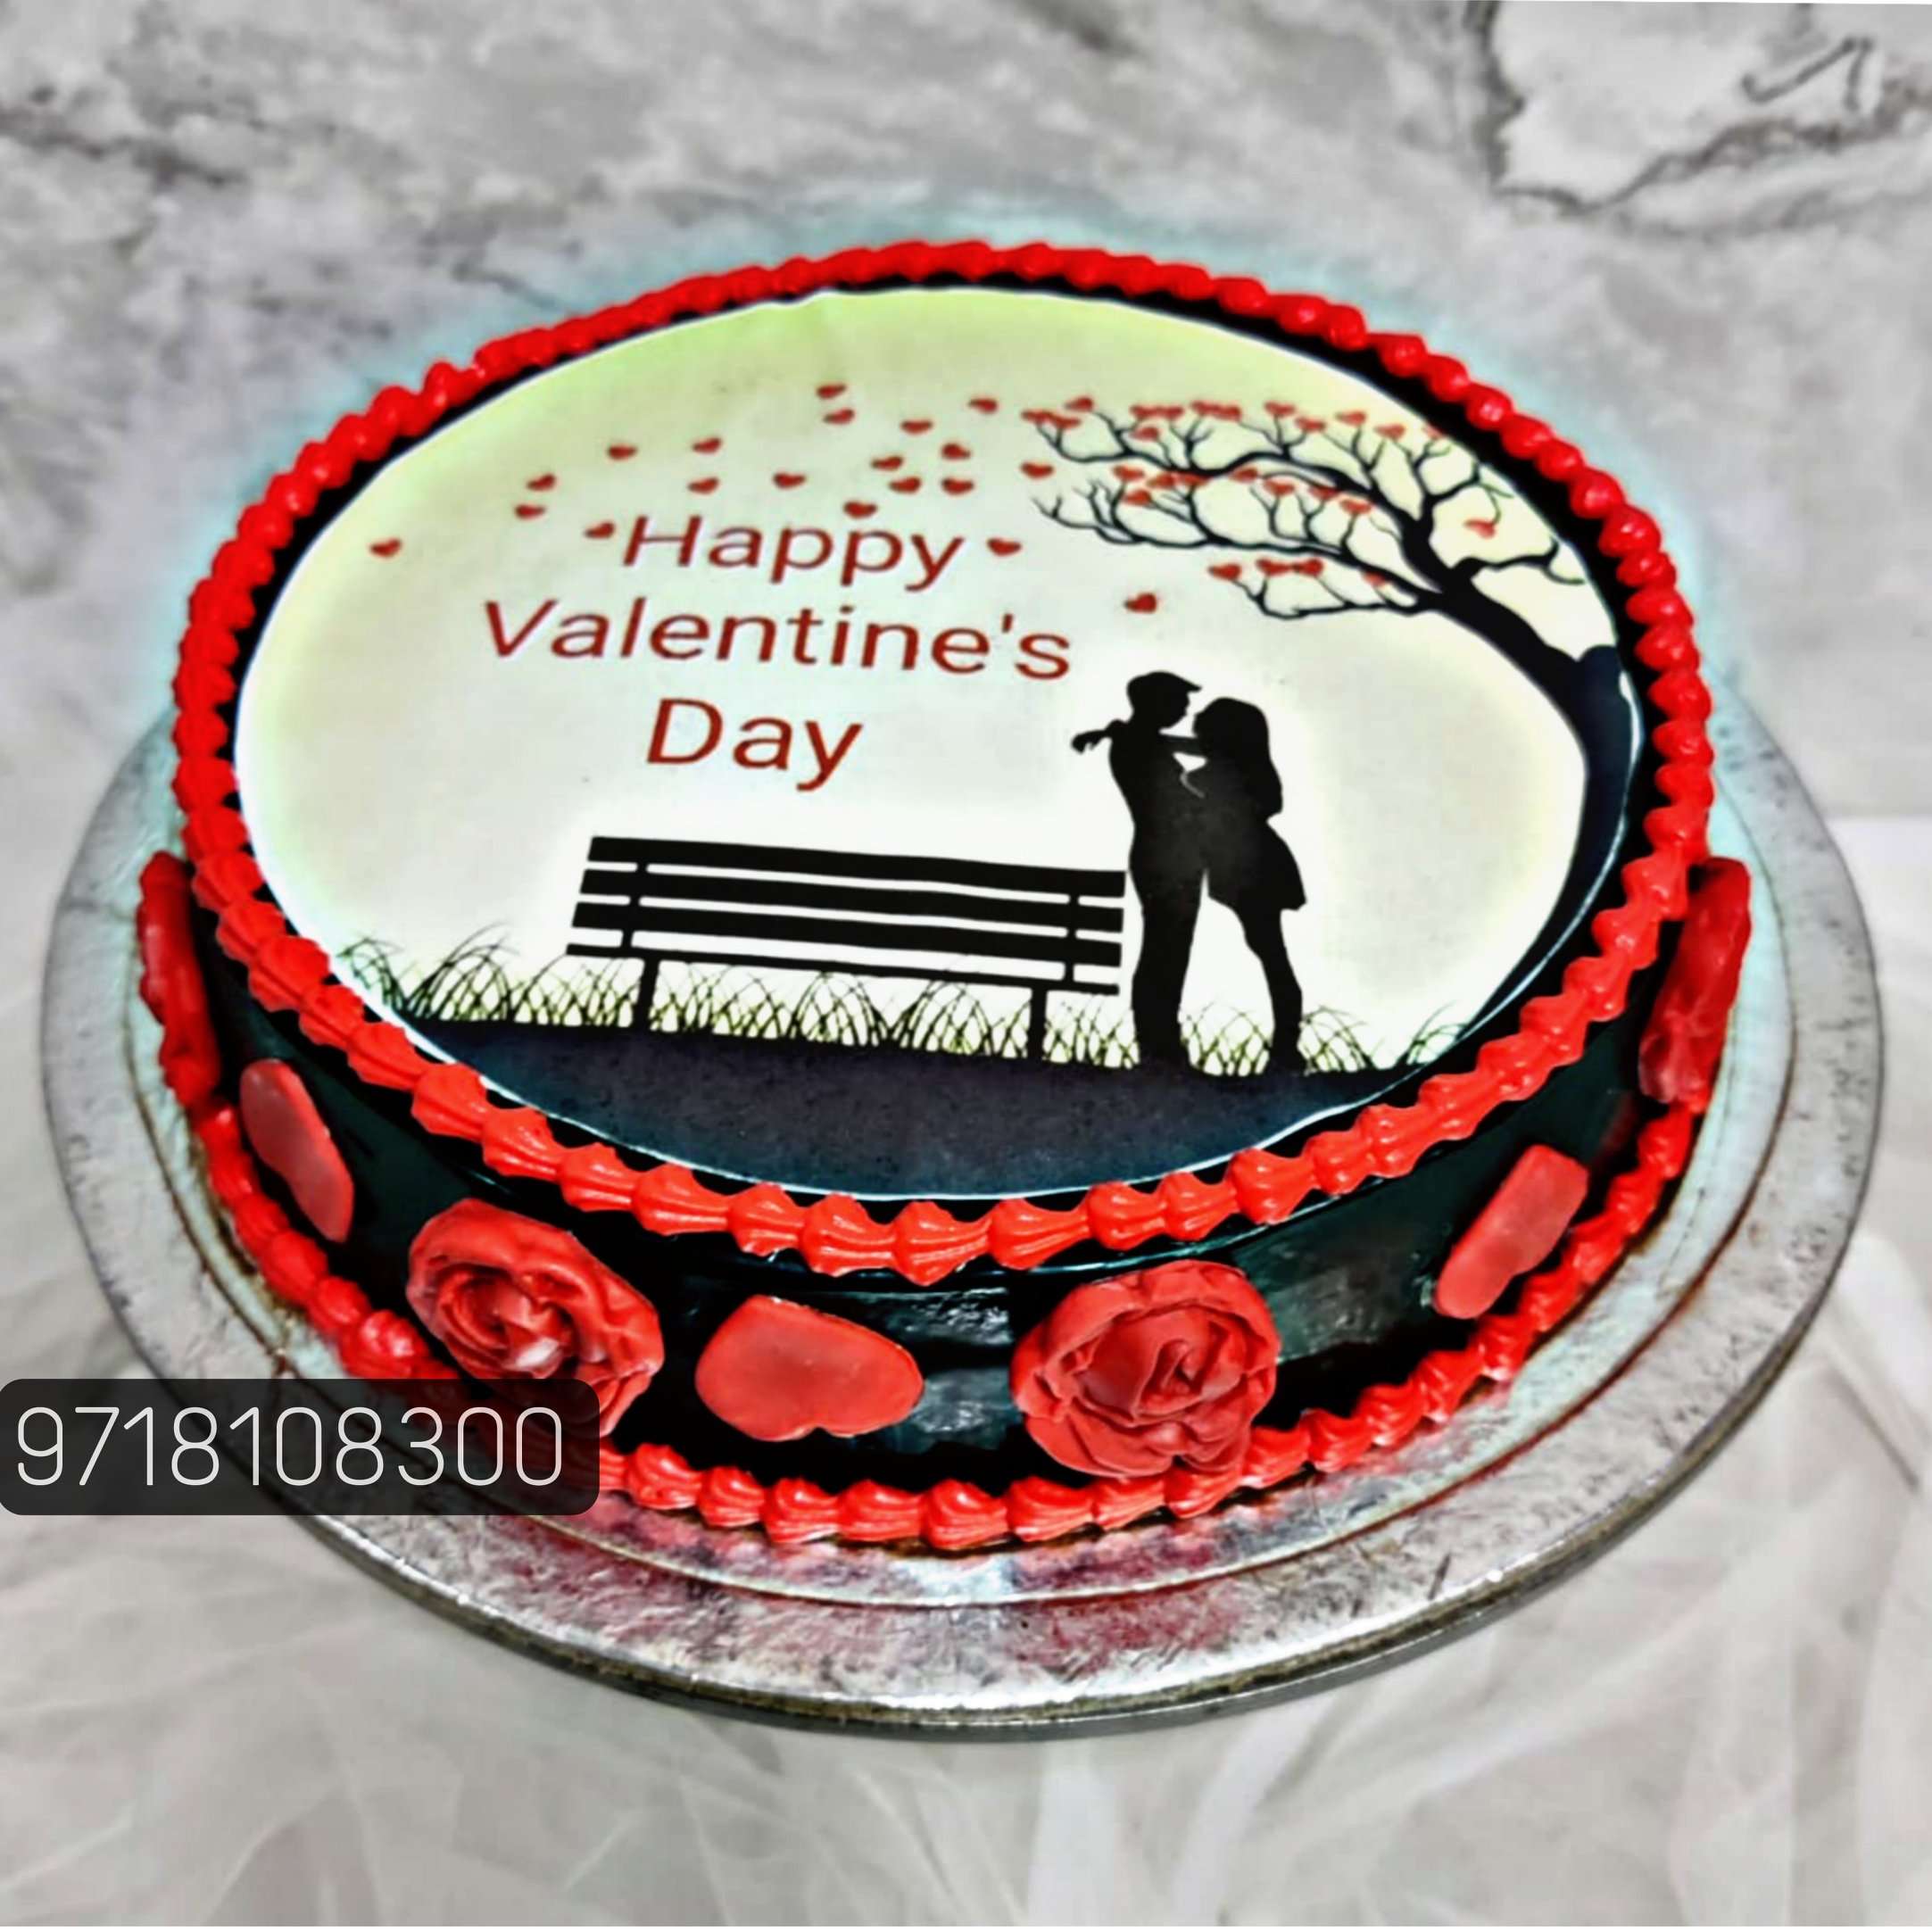 Miss Maud: Valentine's Day Cake Collection at Westfield Carousel-mncb.edu.vn